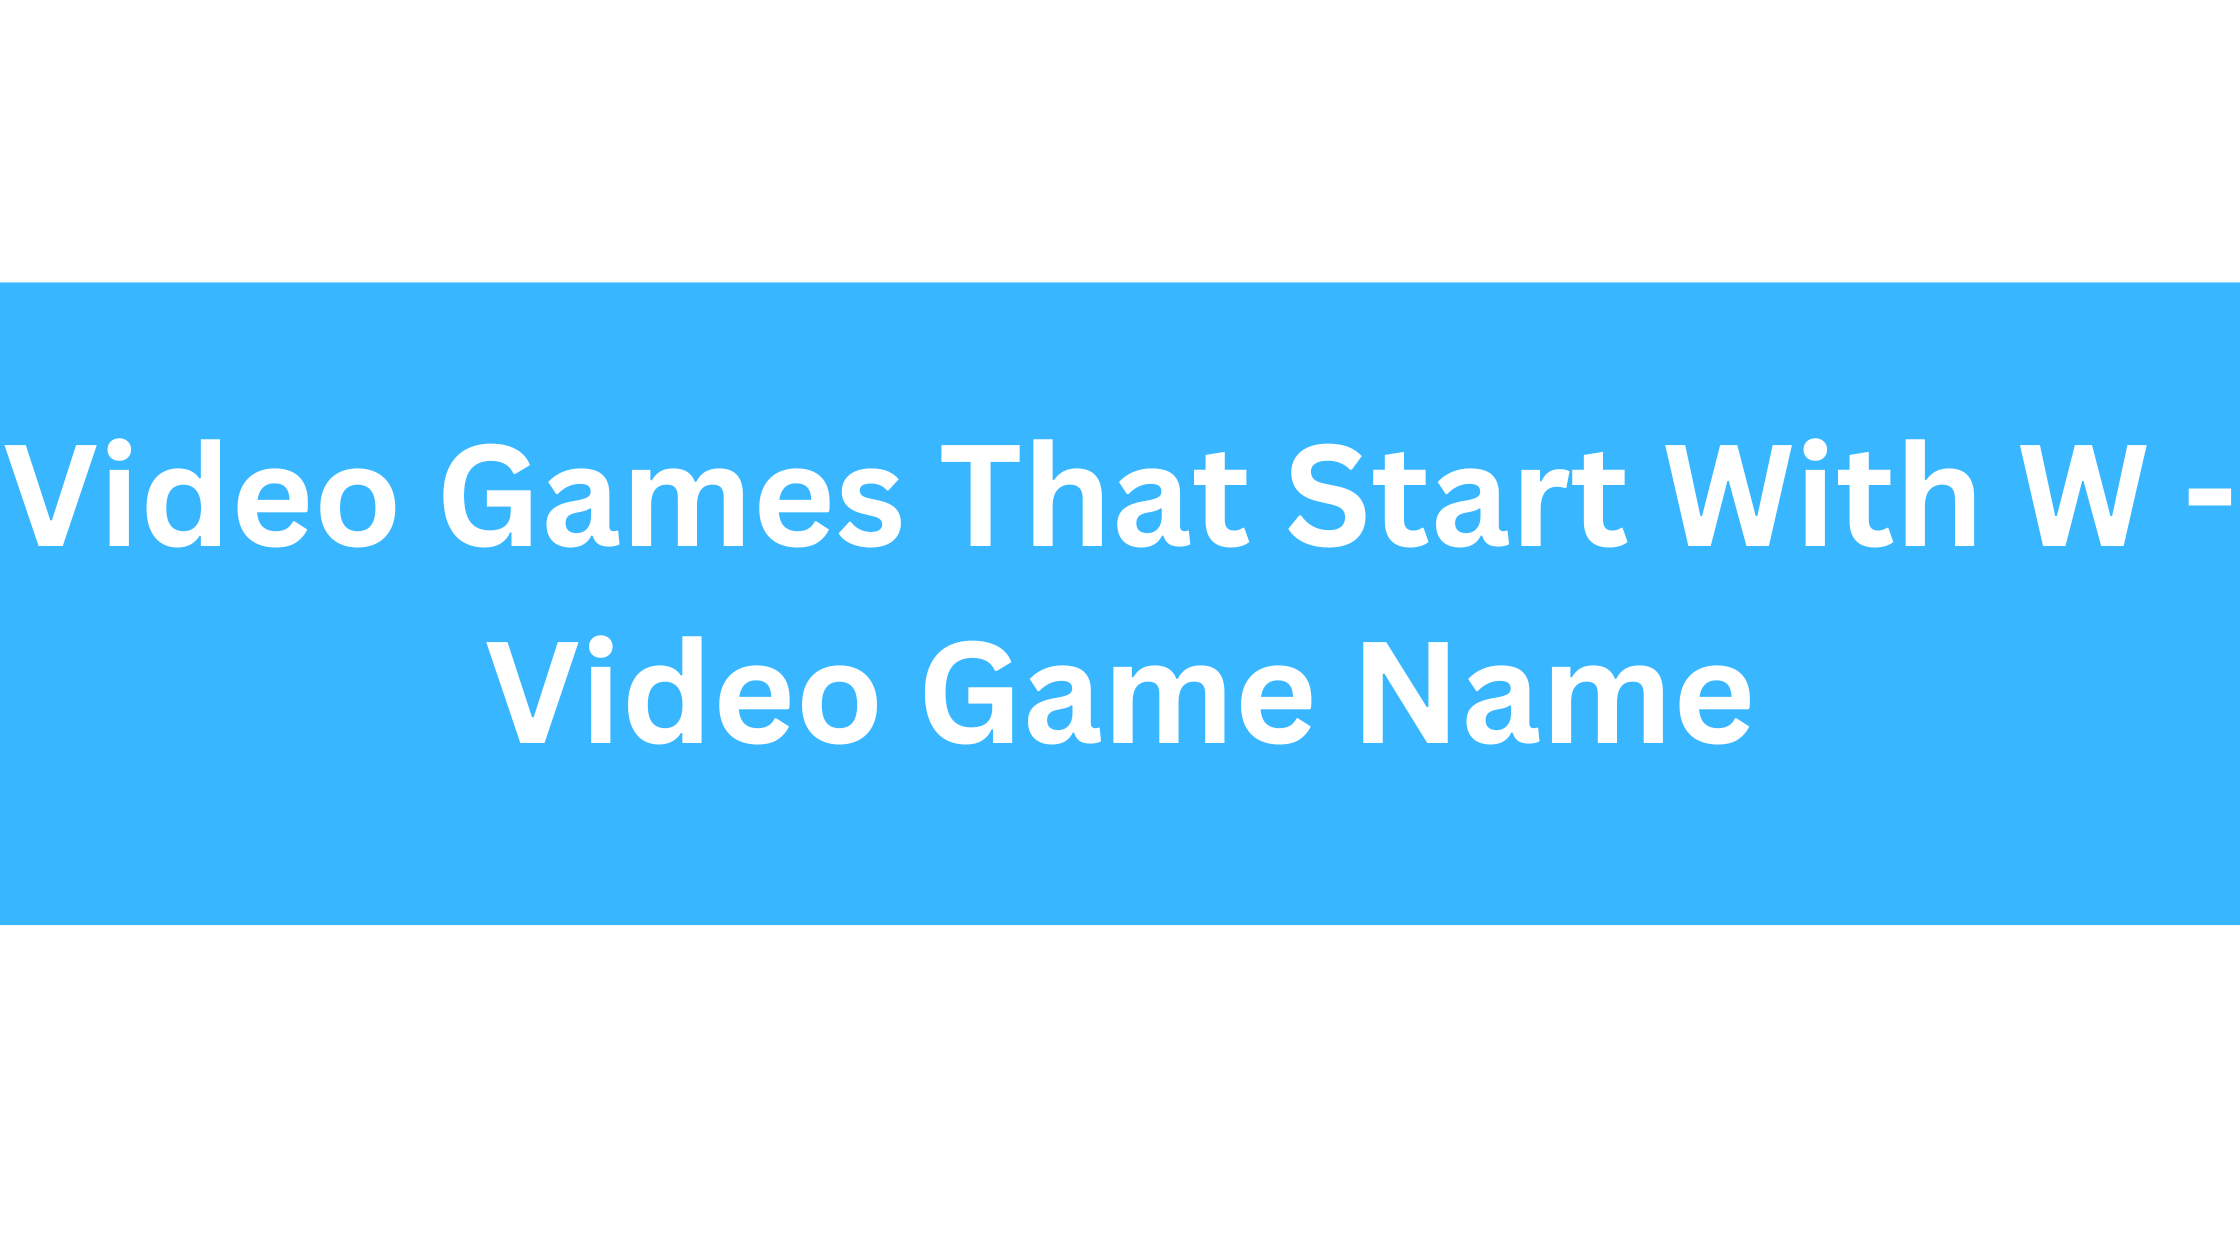 Video Games That Start With W